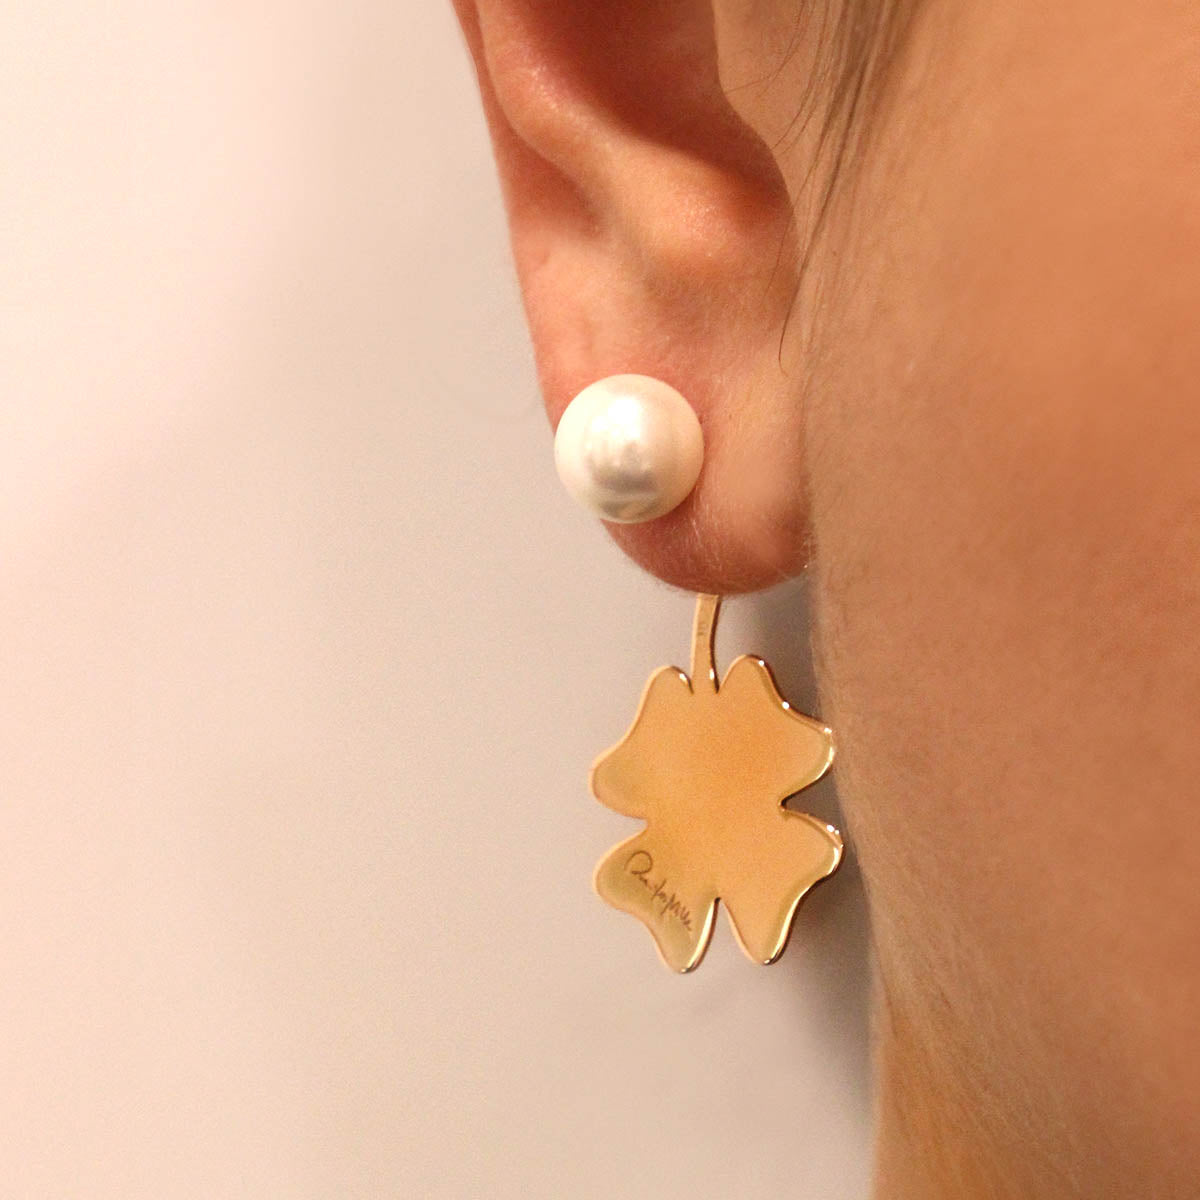 Earrings - Pearl Earrings and Four-leaf Clover Pendant - 3 | Rue des Mille